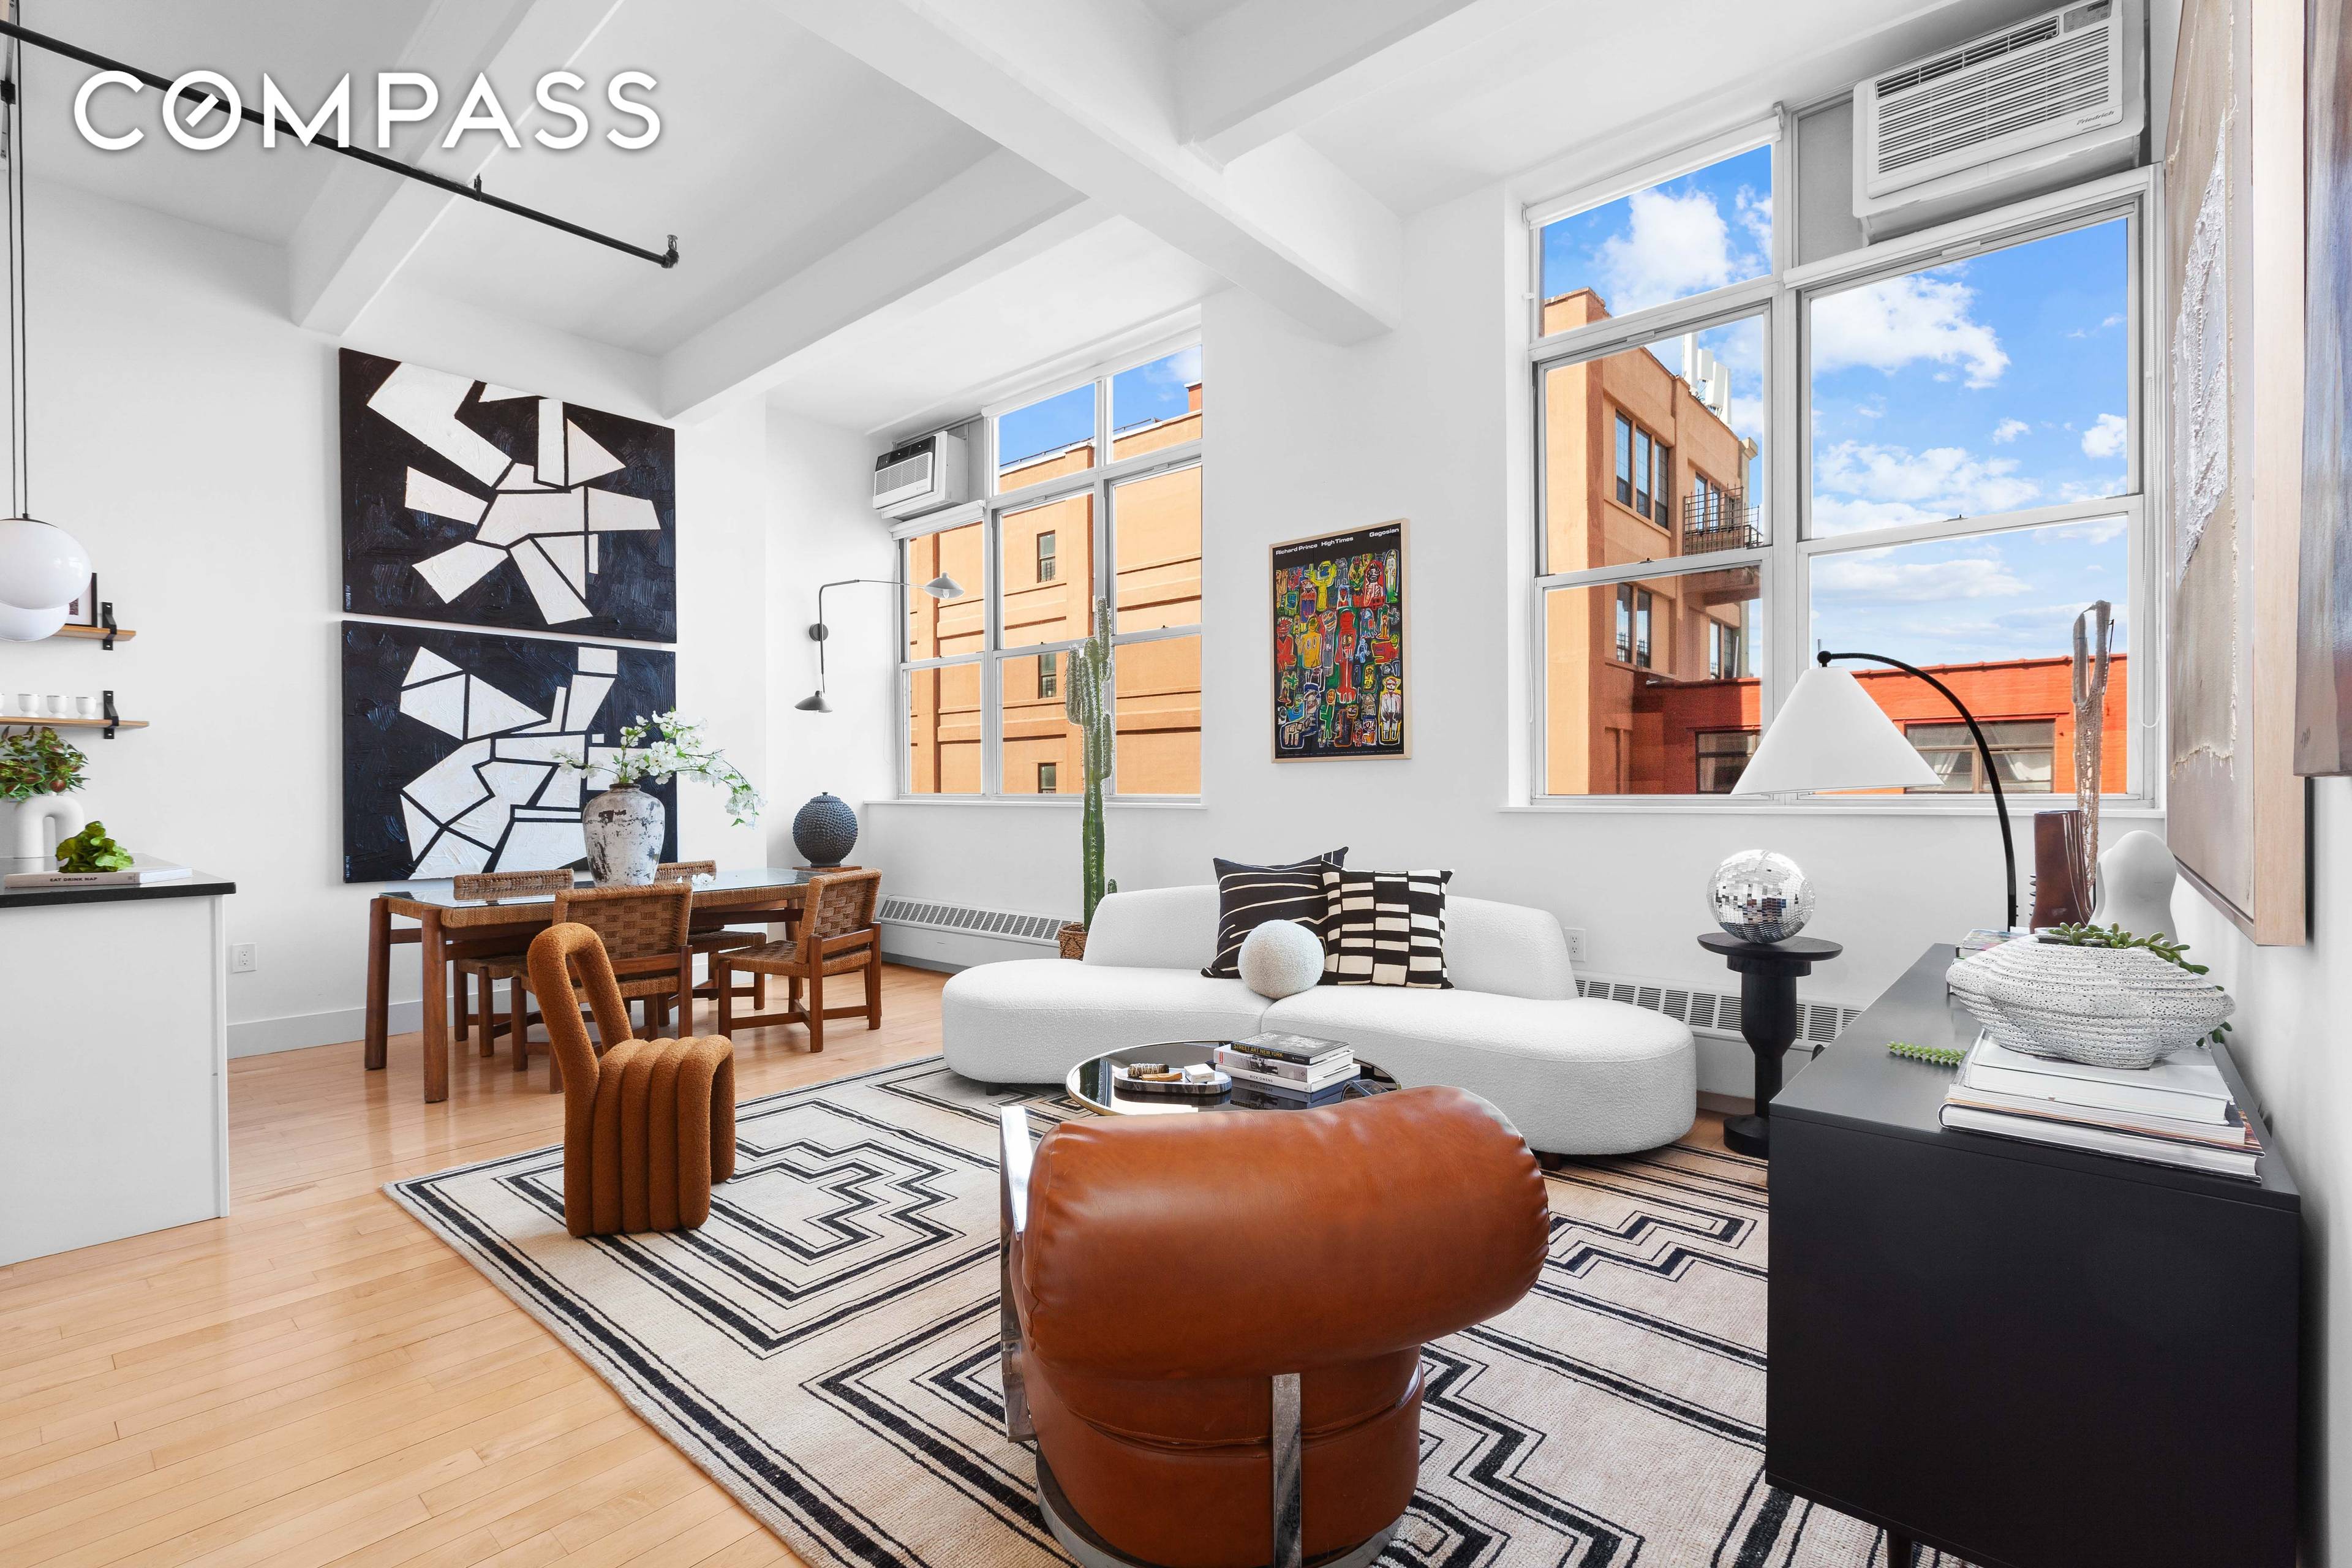 An industrial chic, renovated two bedroom, two bathroom loft with palatial 12 poured concrete beamed ceilings in a full service Clinton Hill condominium.